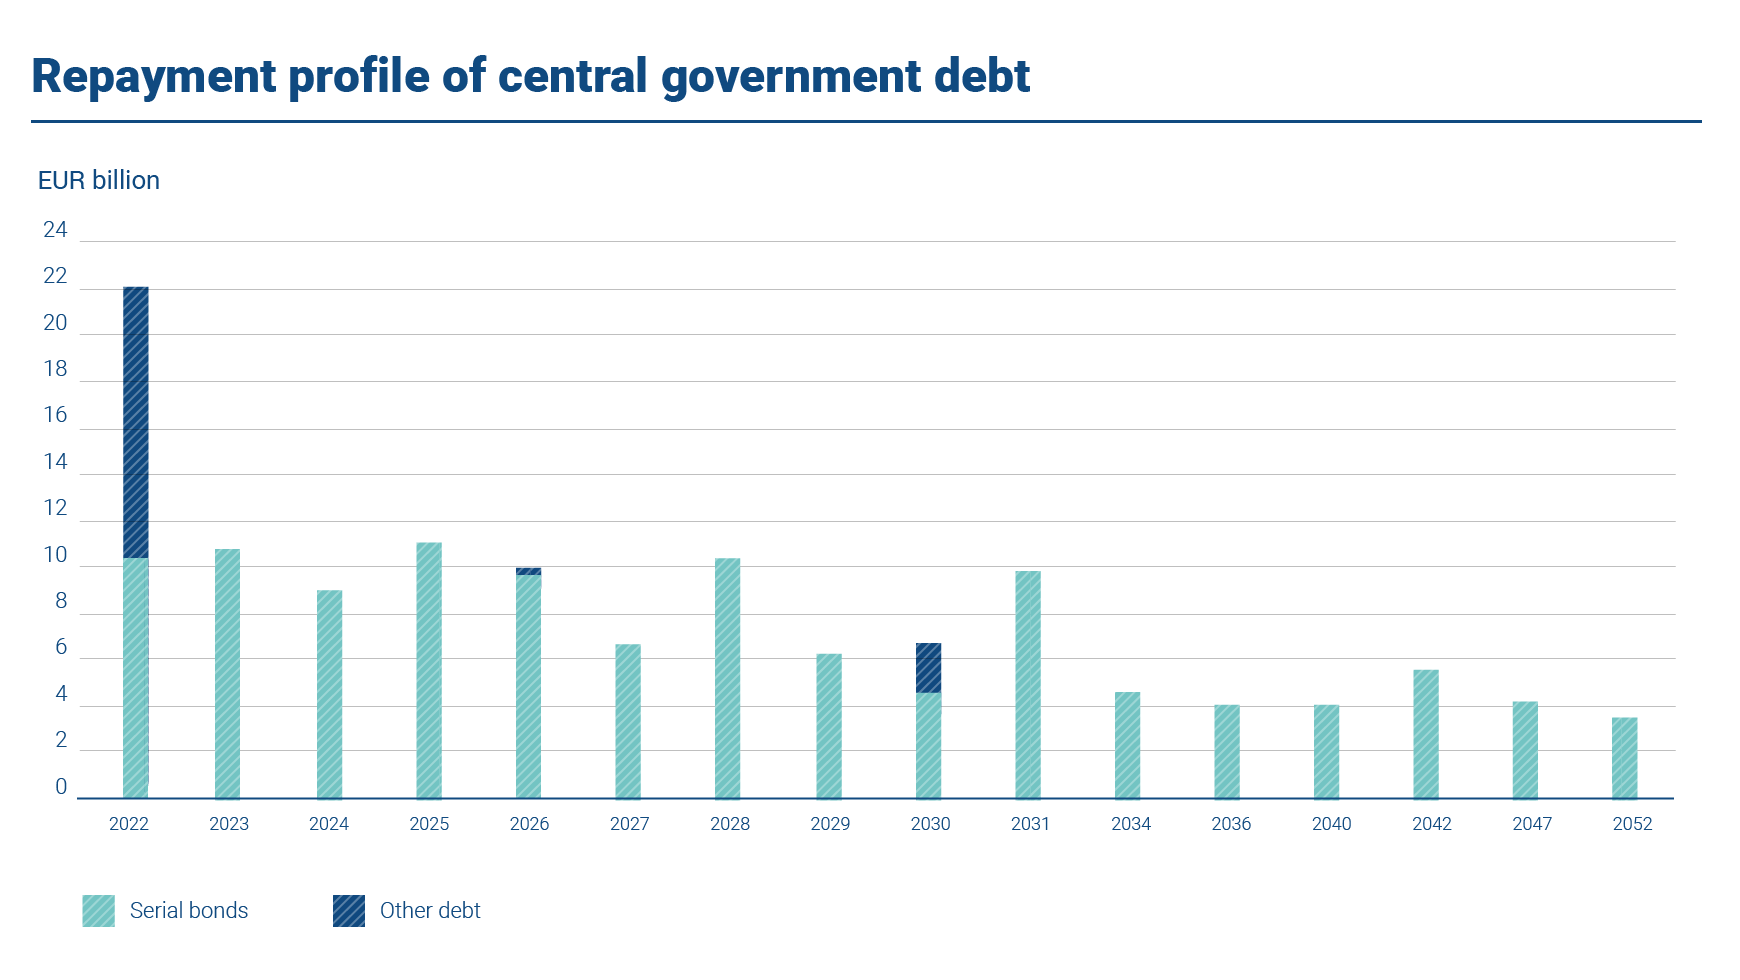 The graph shows the repayment profile of central government debt. 